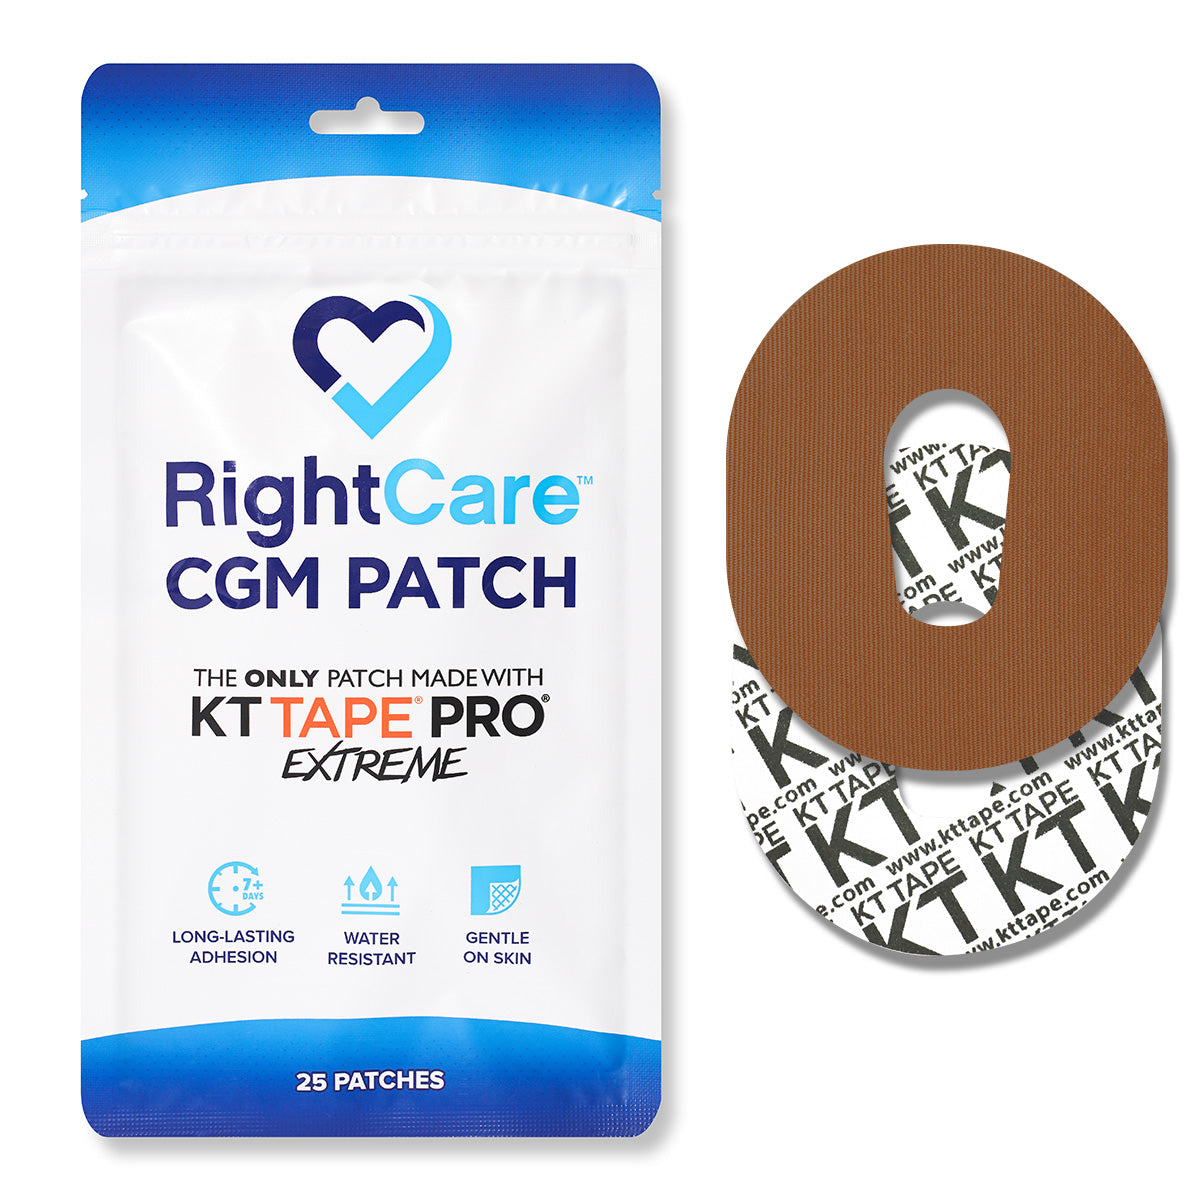 RightCare CGM Adhesive Patch made with KT Tape, Dexcom G6 , Bag of 25 87381036